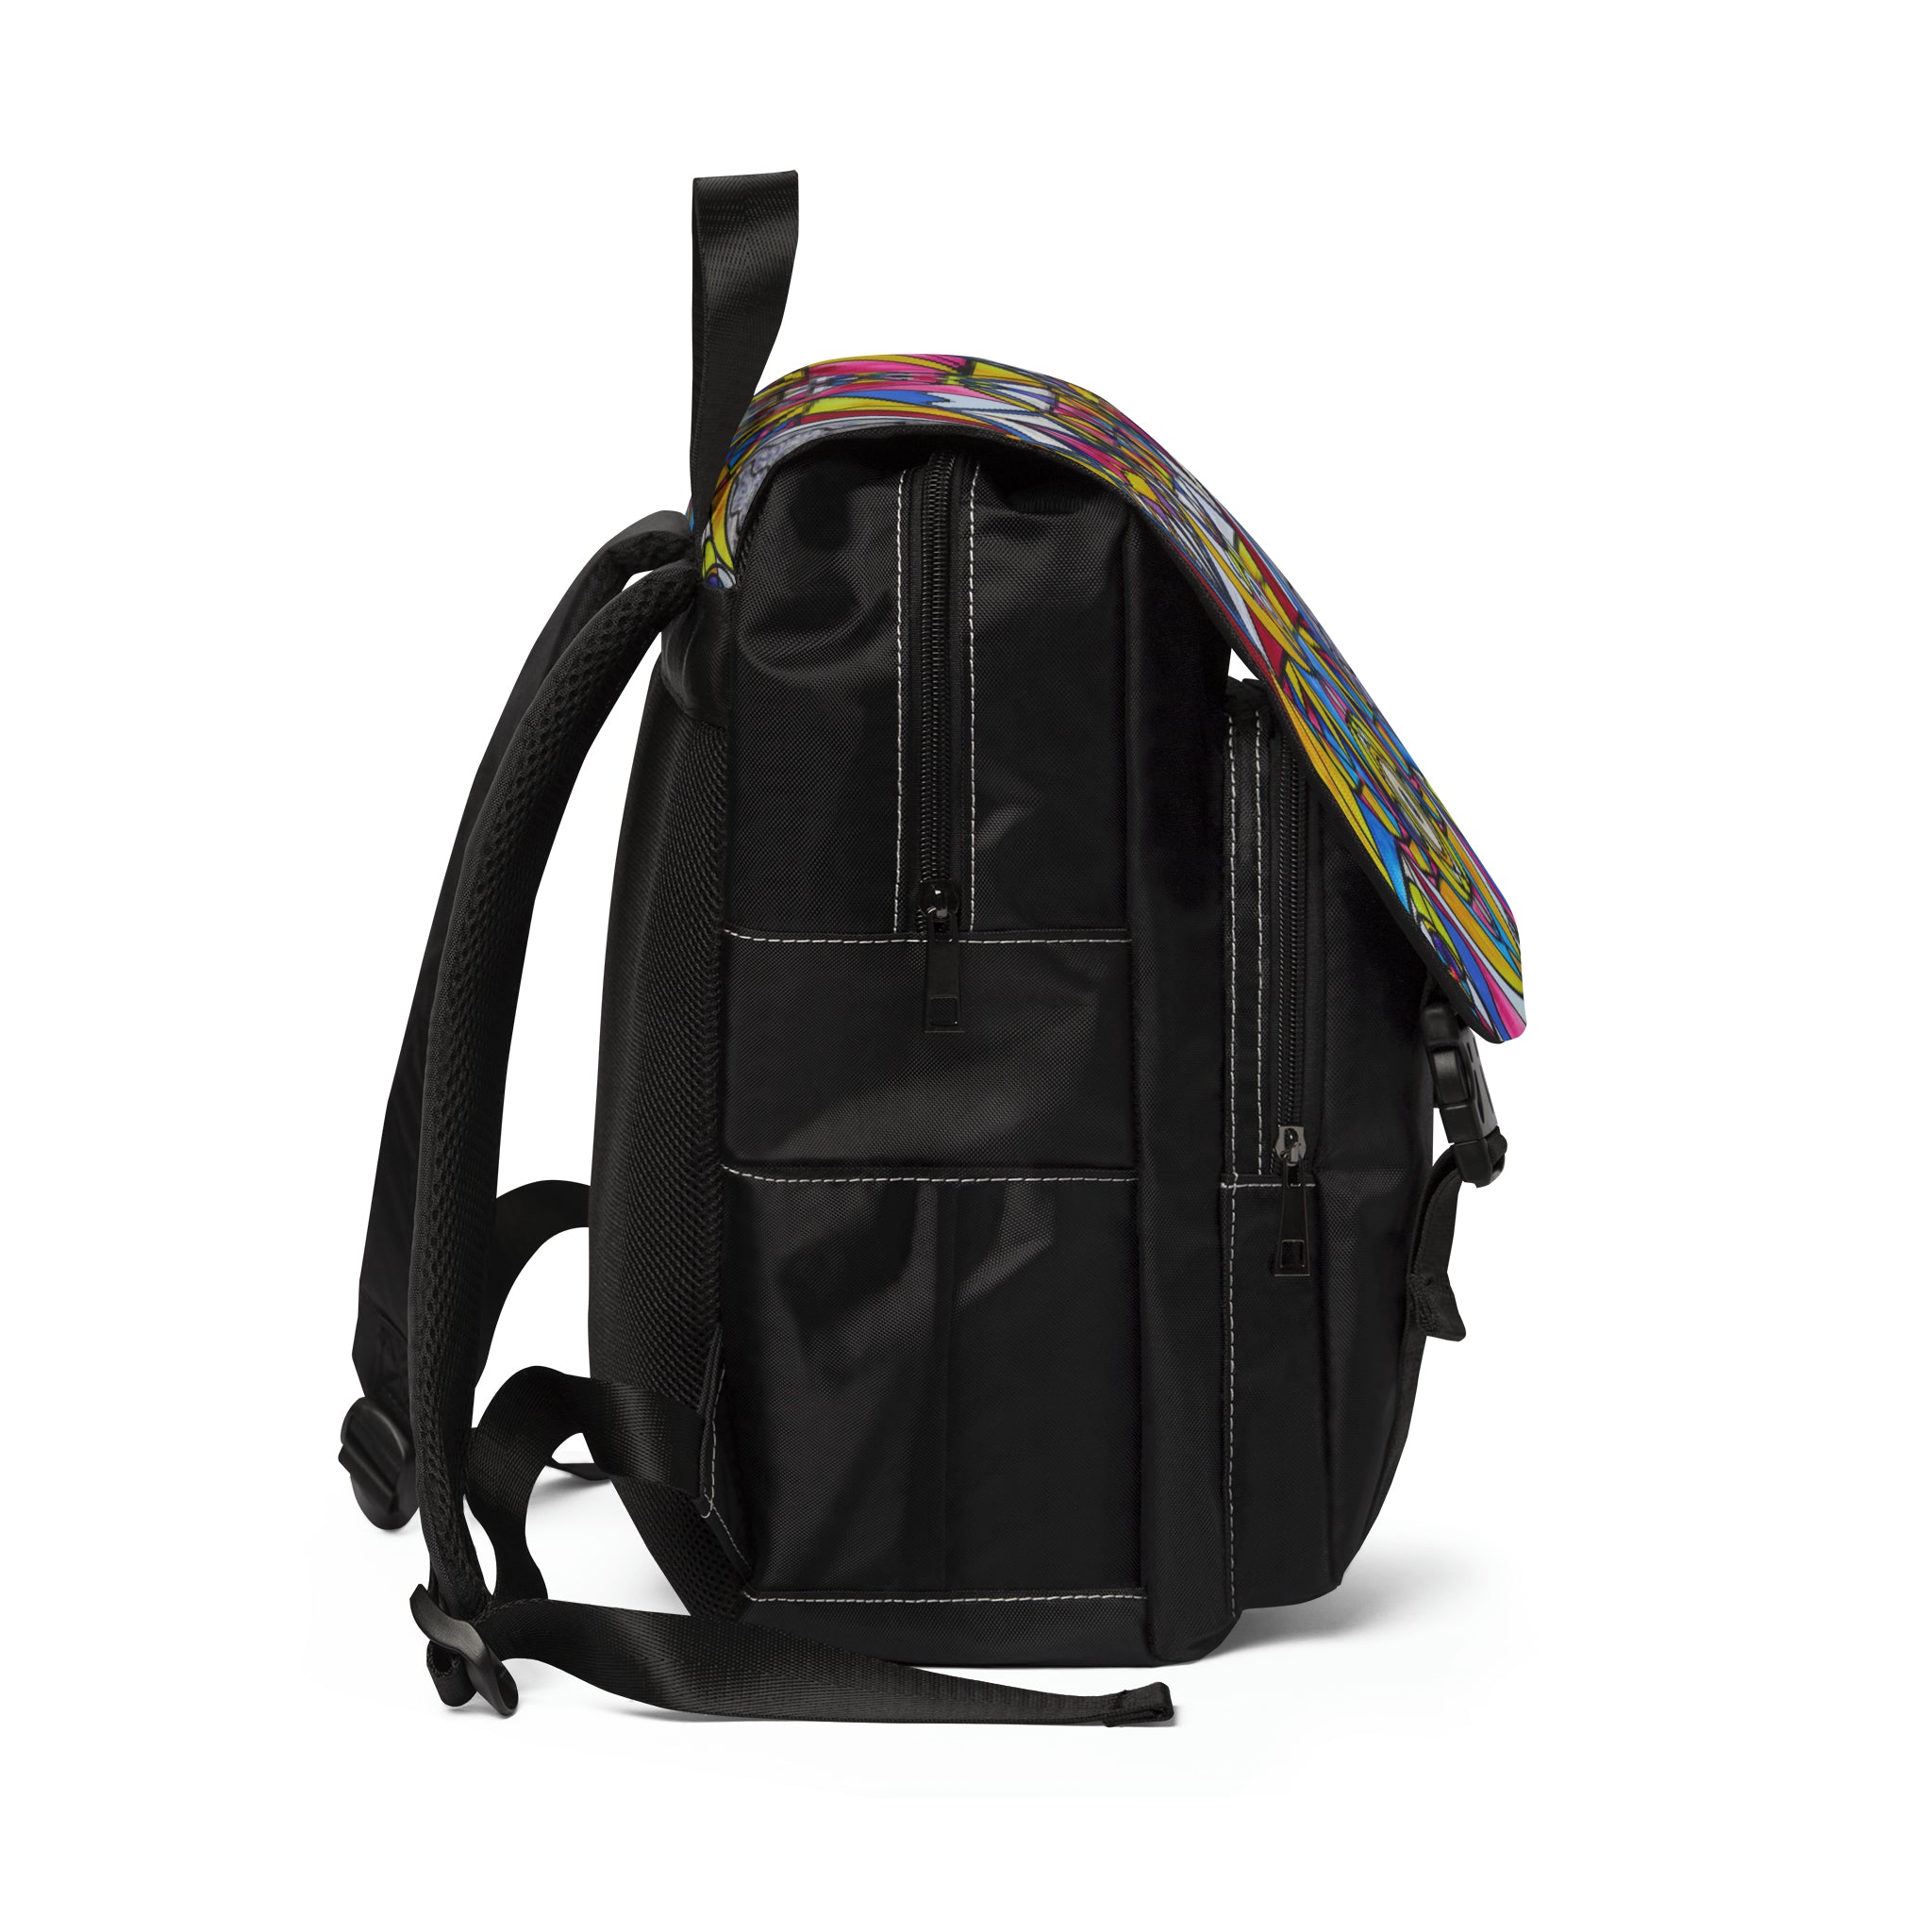 the-ultimate-online-sports-store-for-sanat-kumara-consciousness-unisex-casual-shoulder-backpack-sale_1.jpg